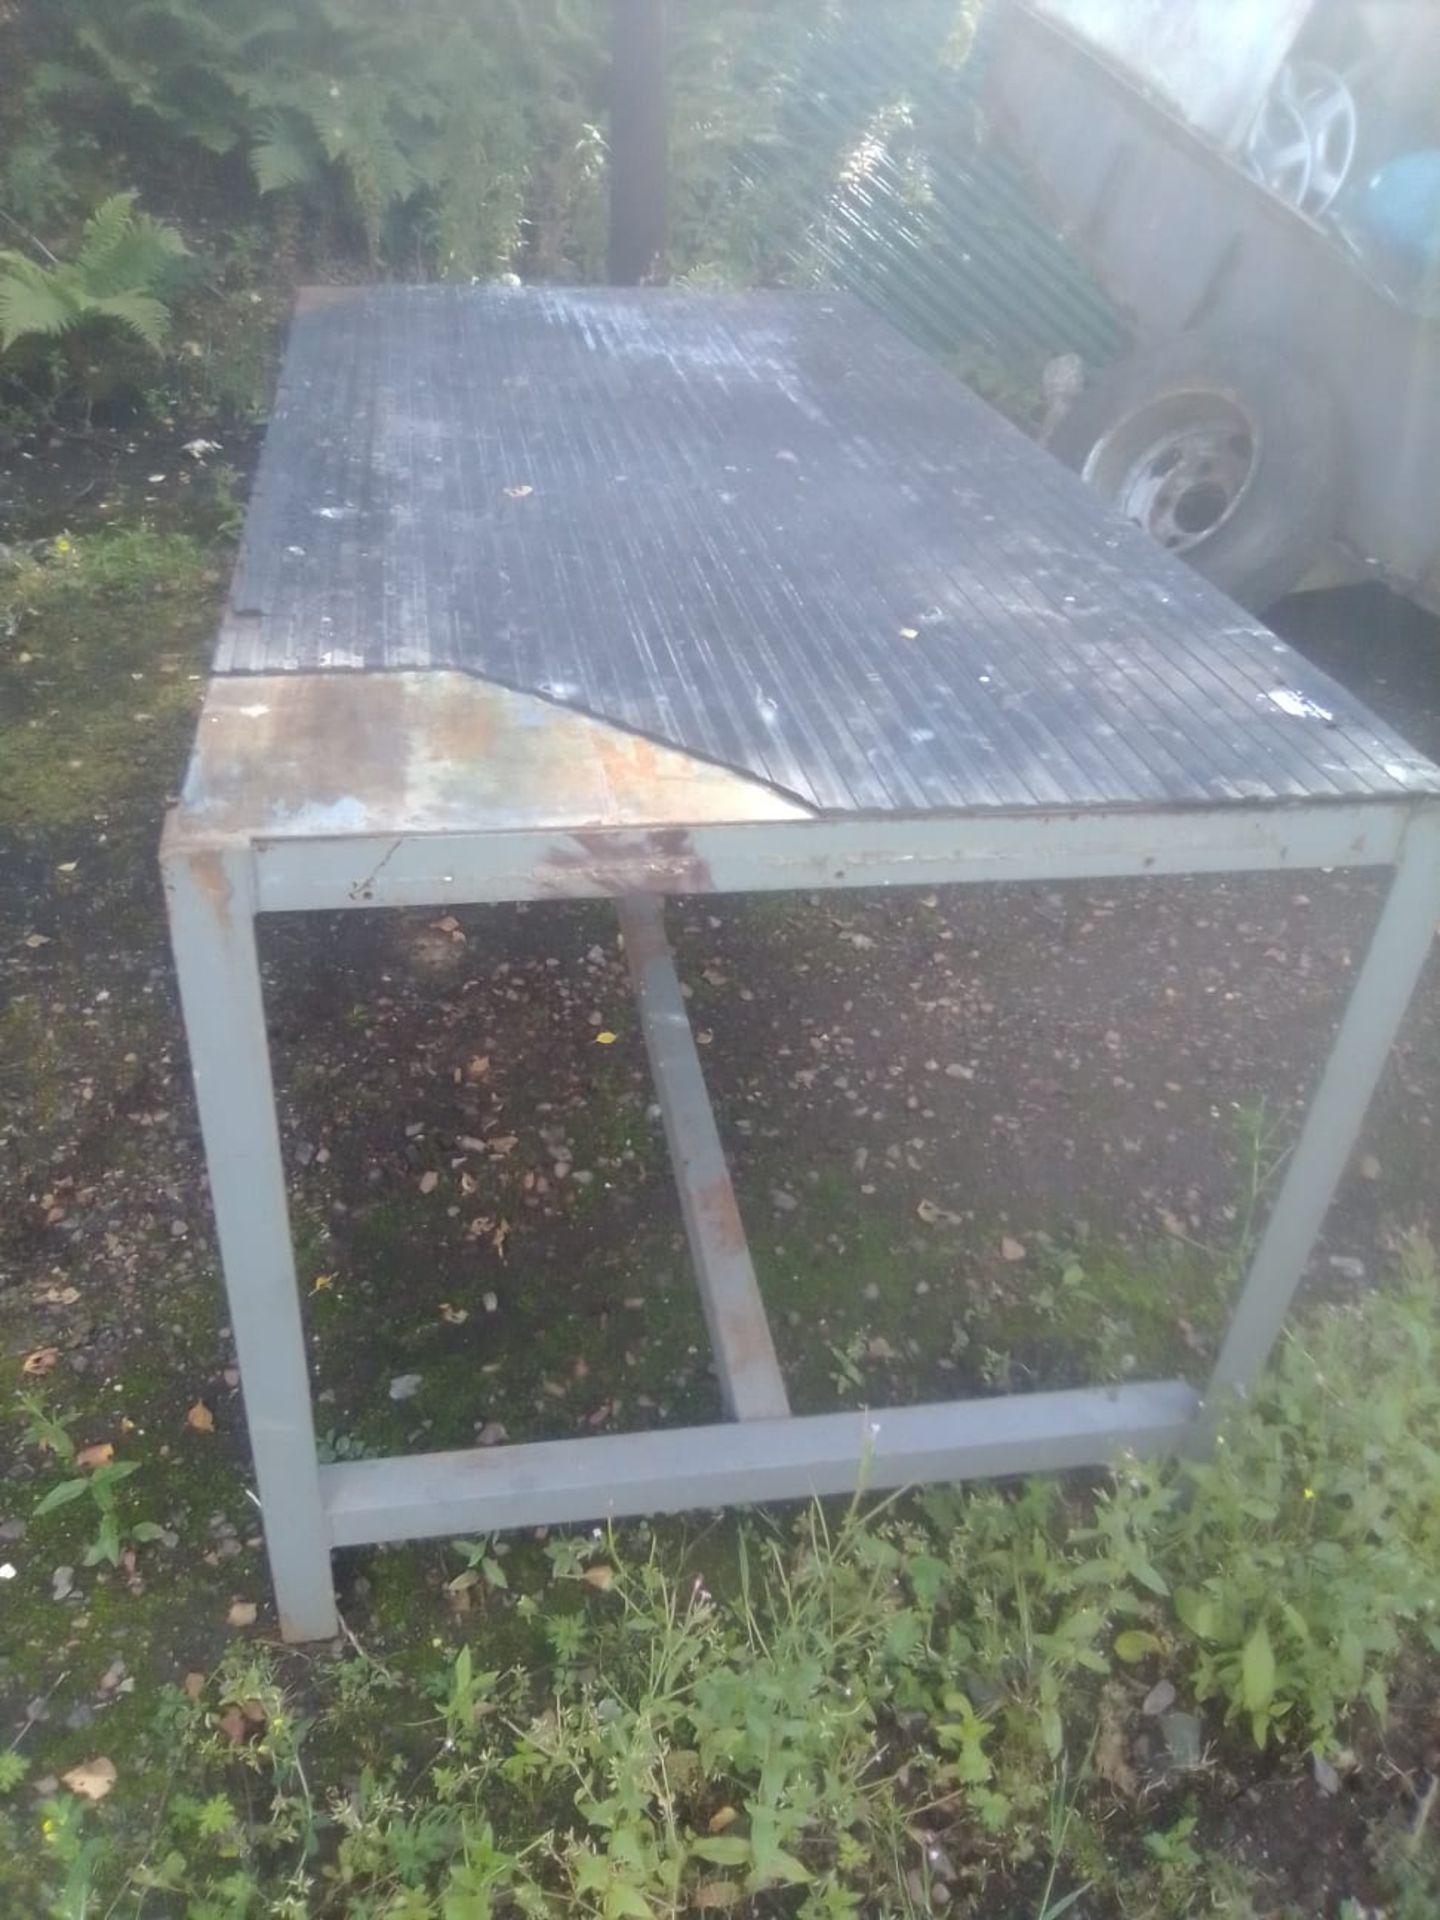 Bench Steel Work Table - Image 6 of 7